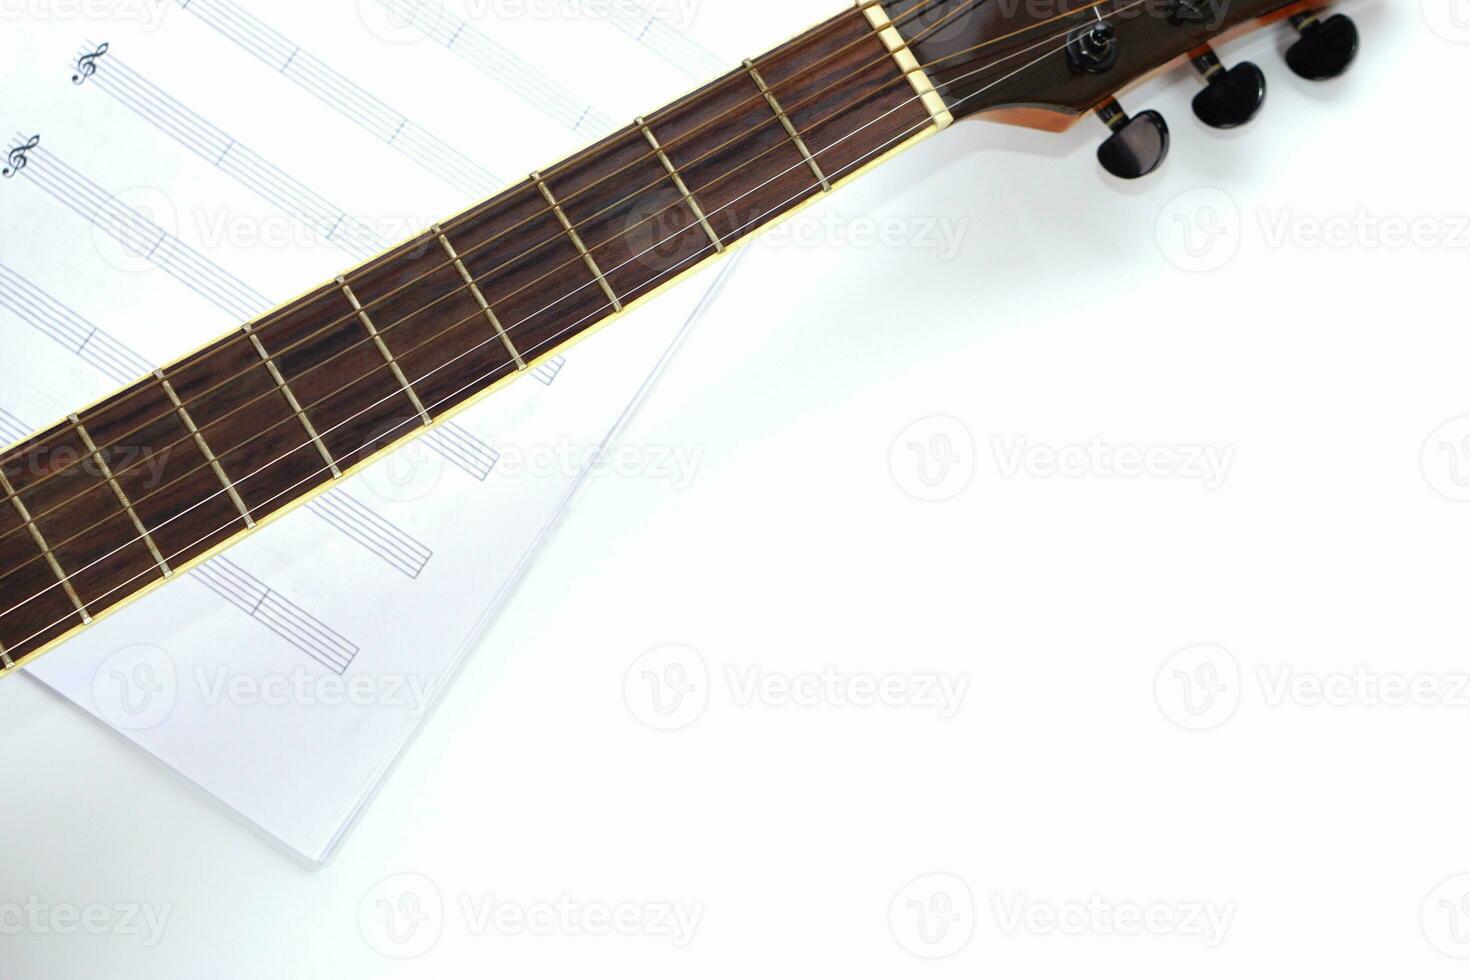 Focus the acoustic guitar neck and blur musical notes on white background. Love, music and learning concept. photo